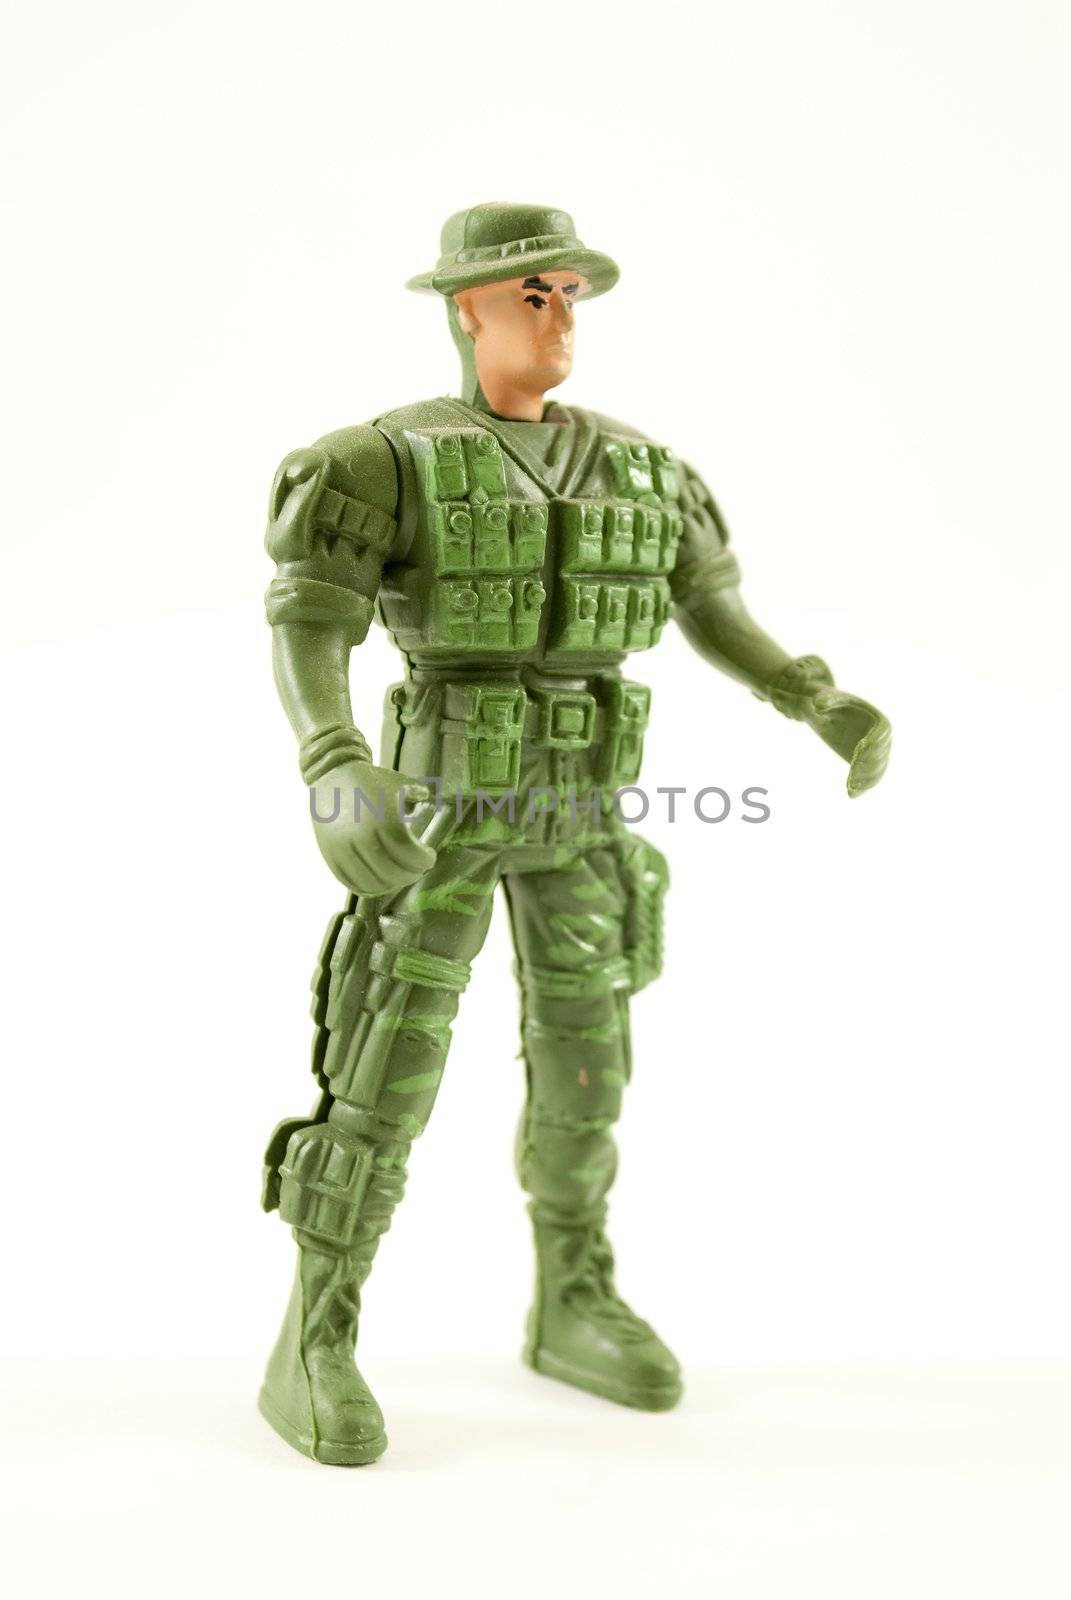 Toy Soldier by lauria